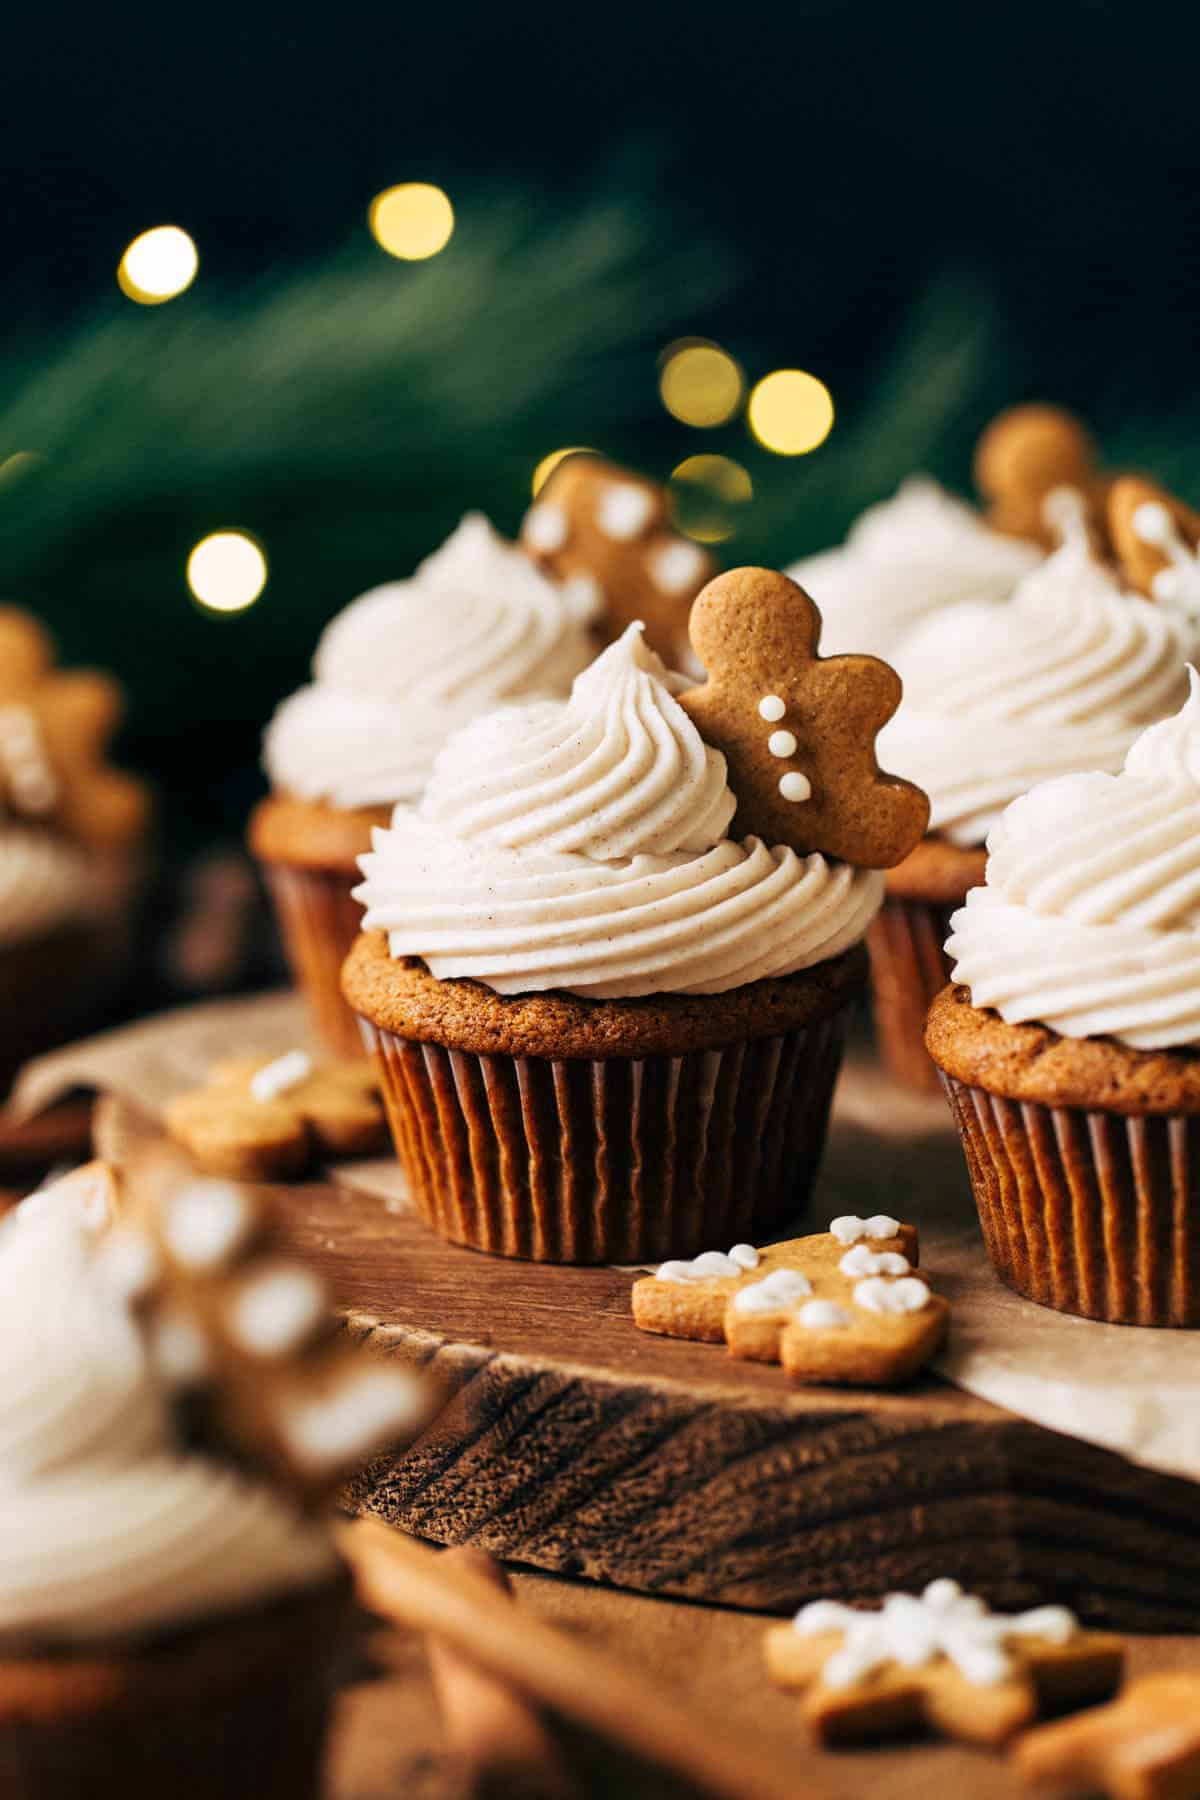 Gingerbread cupcakes on a wood slice with Christmas lights in the background.